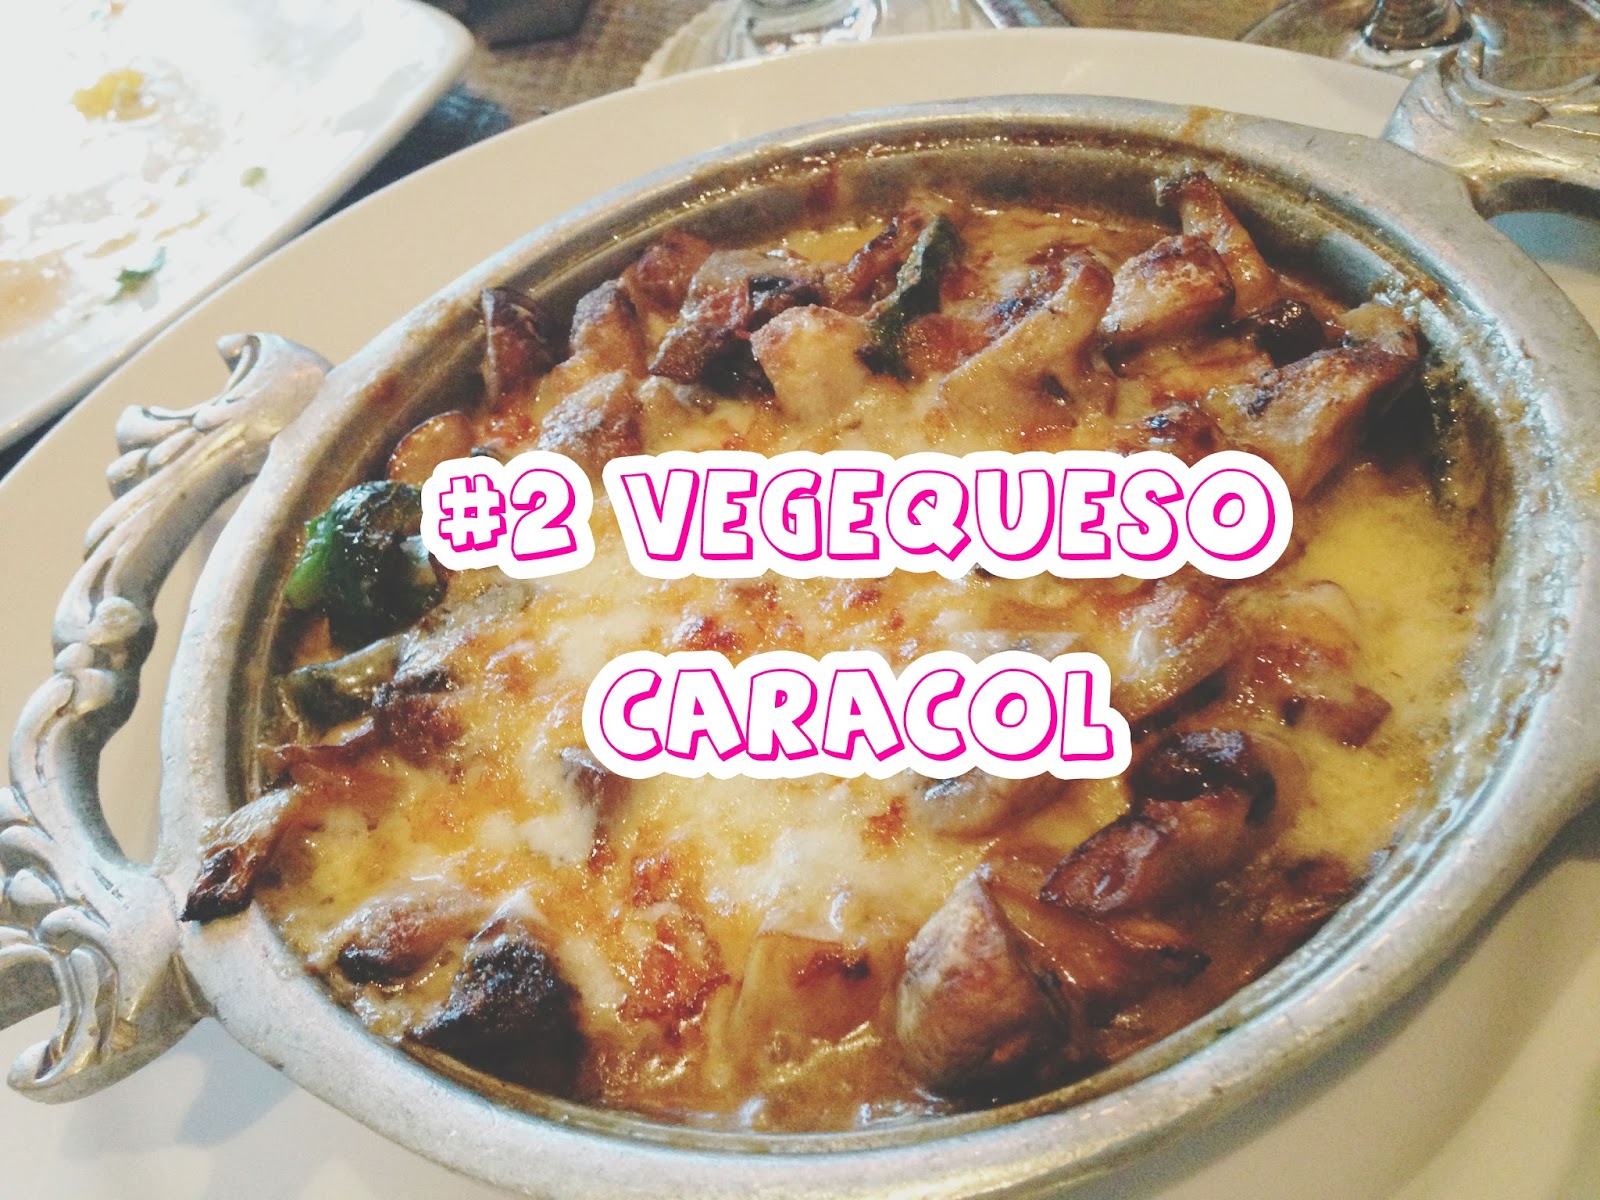 #2 Vegequeso at Caracol - a restaurant in Houston, Texas